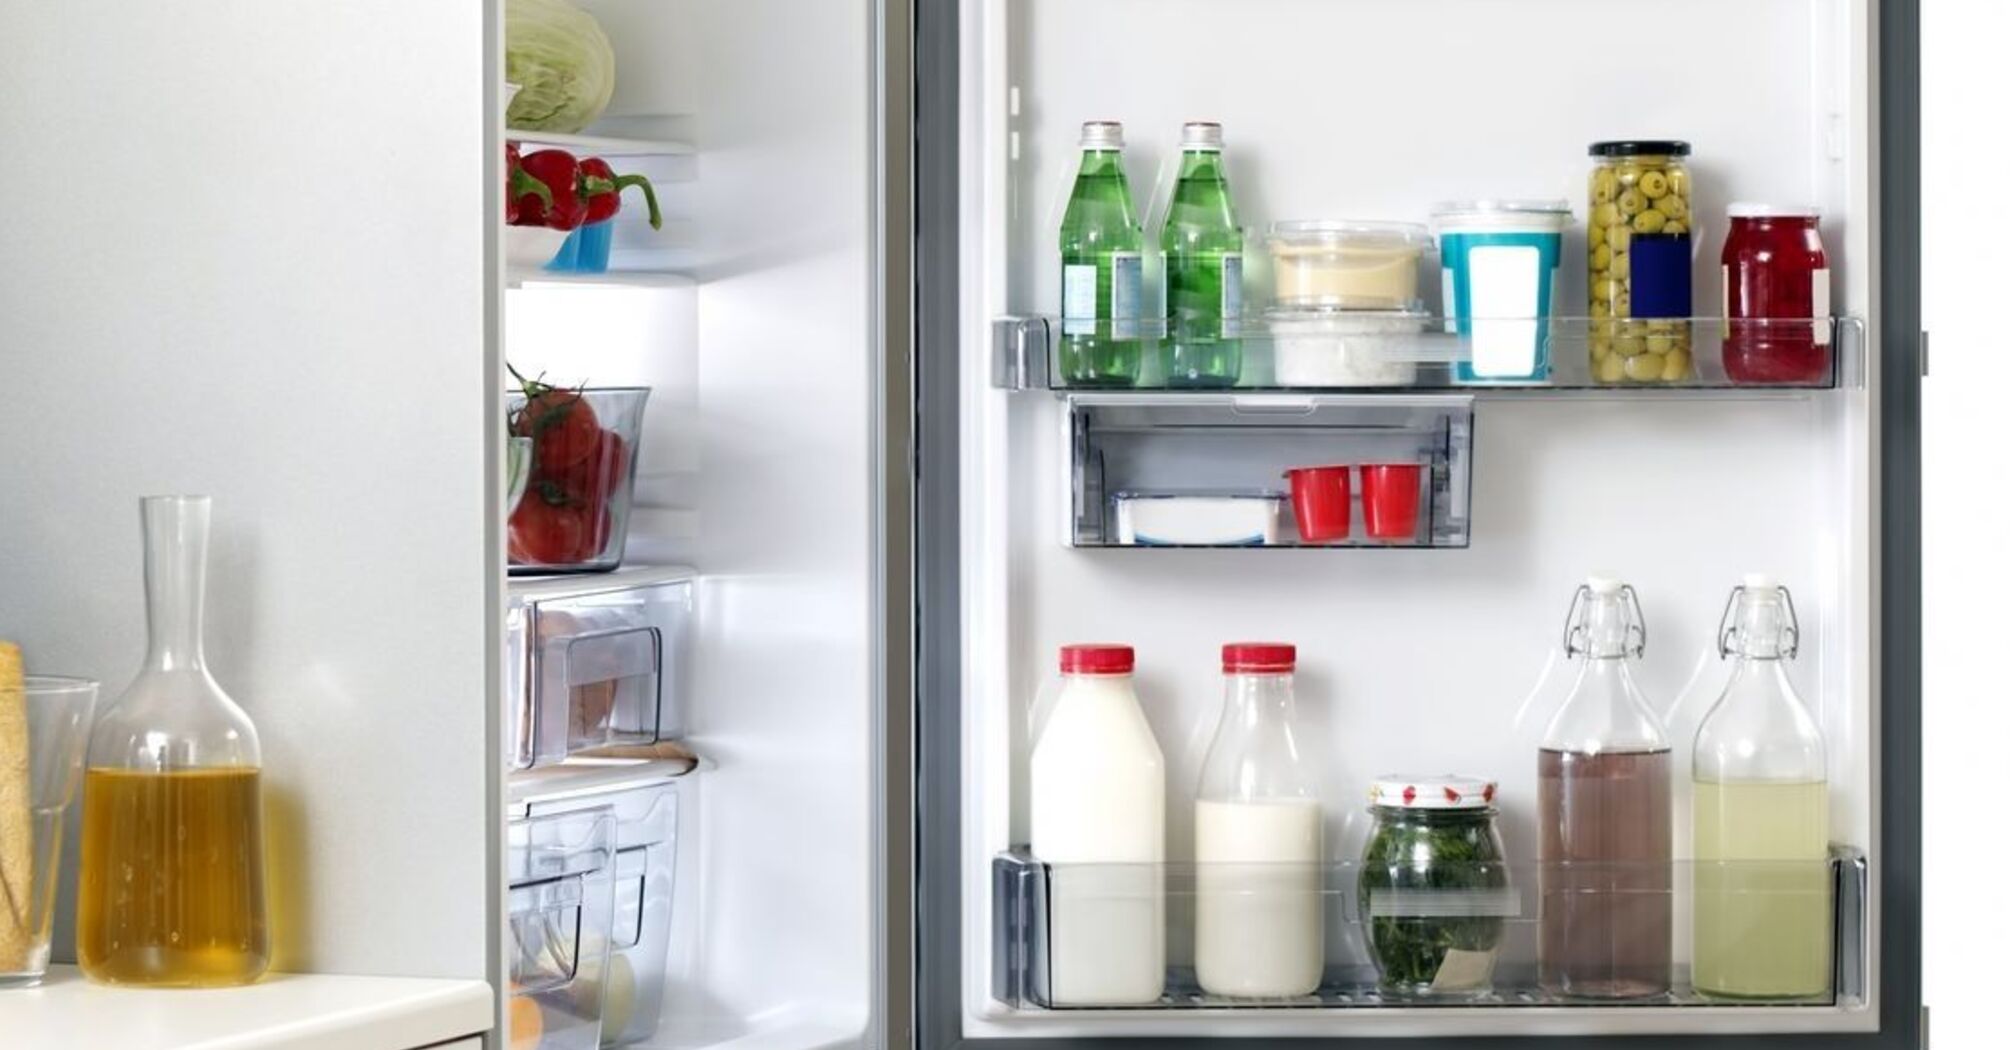 A popular product that should never be stored in the refrigerator door has been named